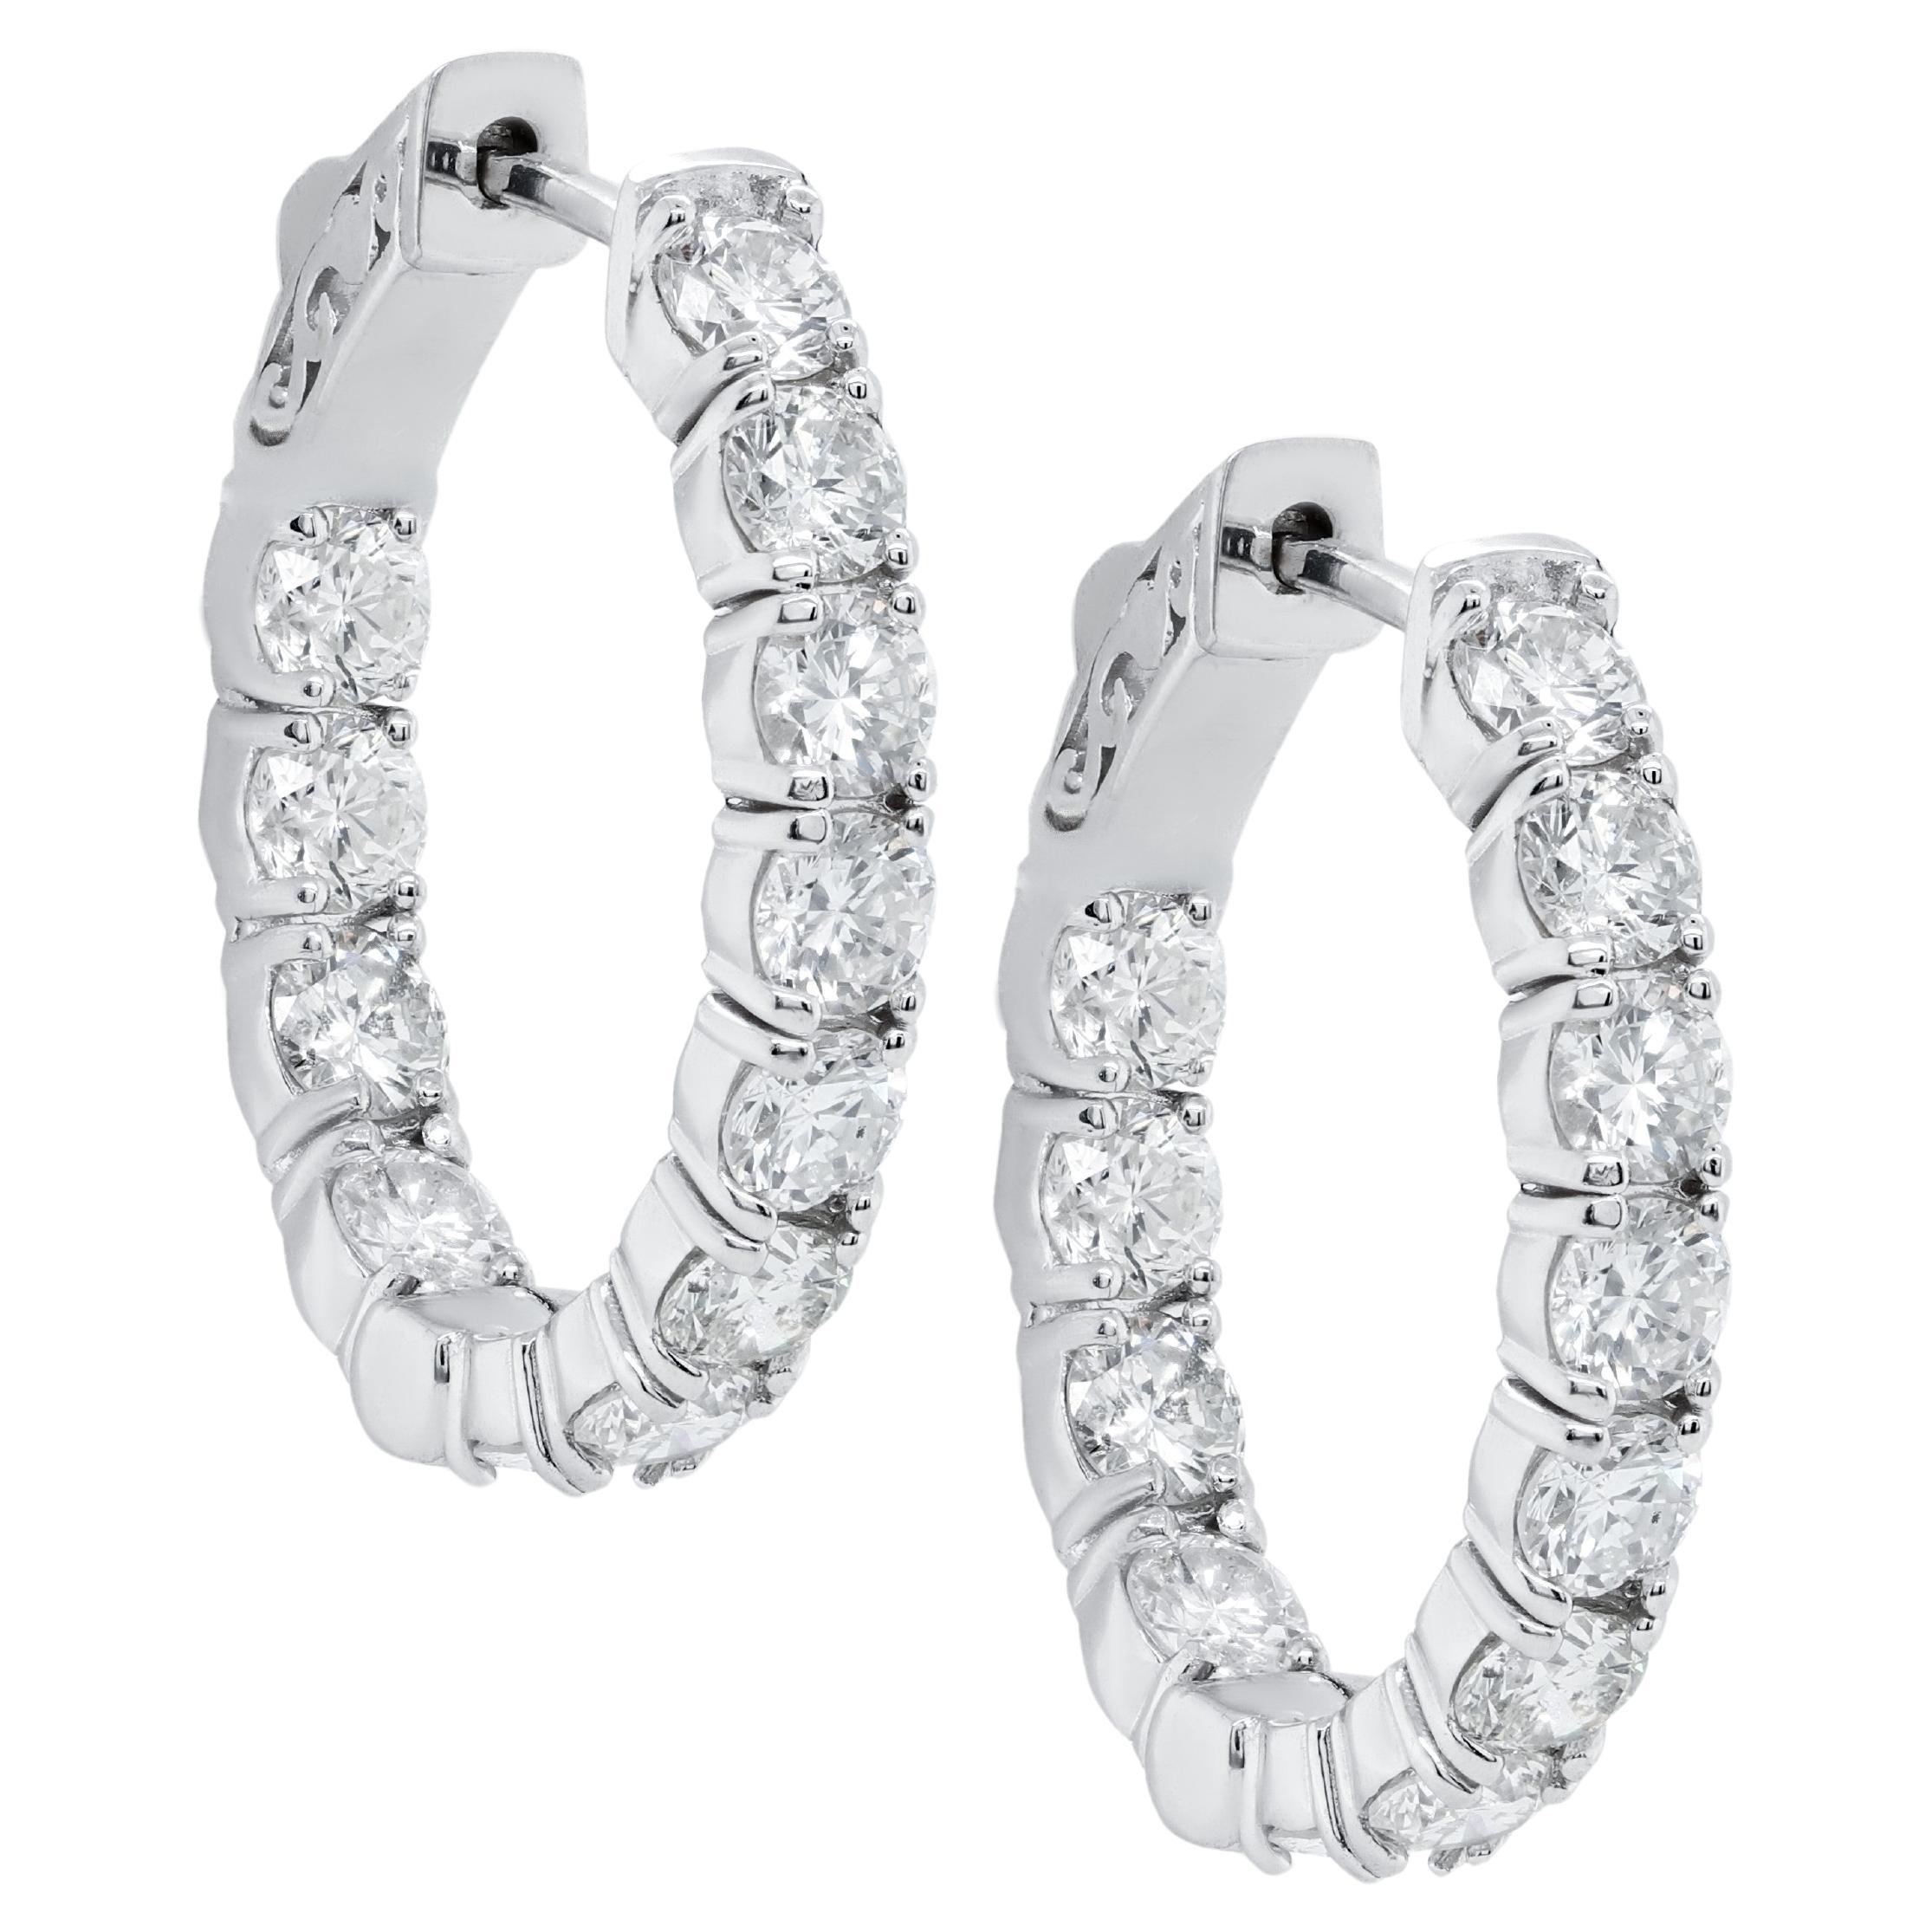 Diana M. 14 kt white gold, 1" hoop earrings featuring 3.00 cts tw round diamonds For Sale